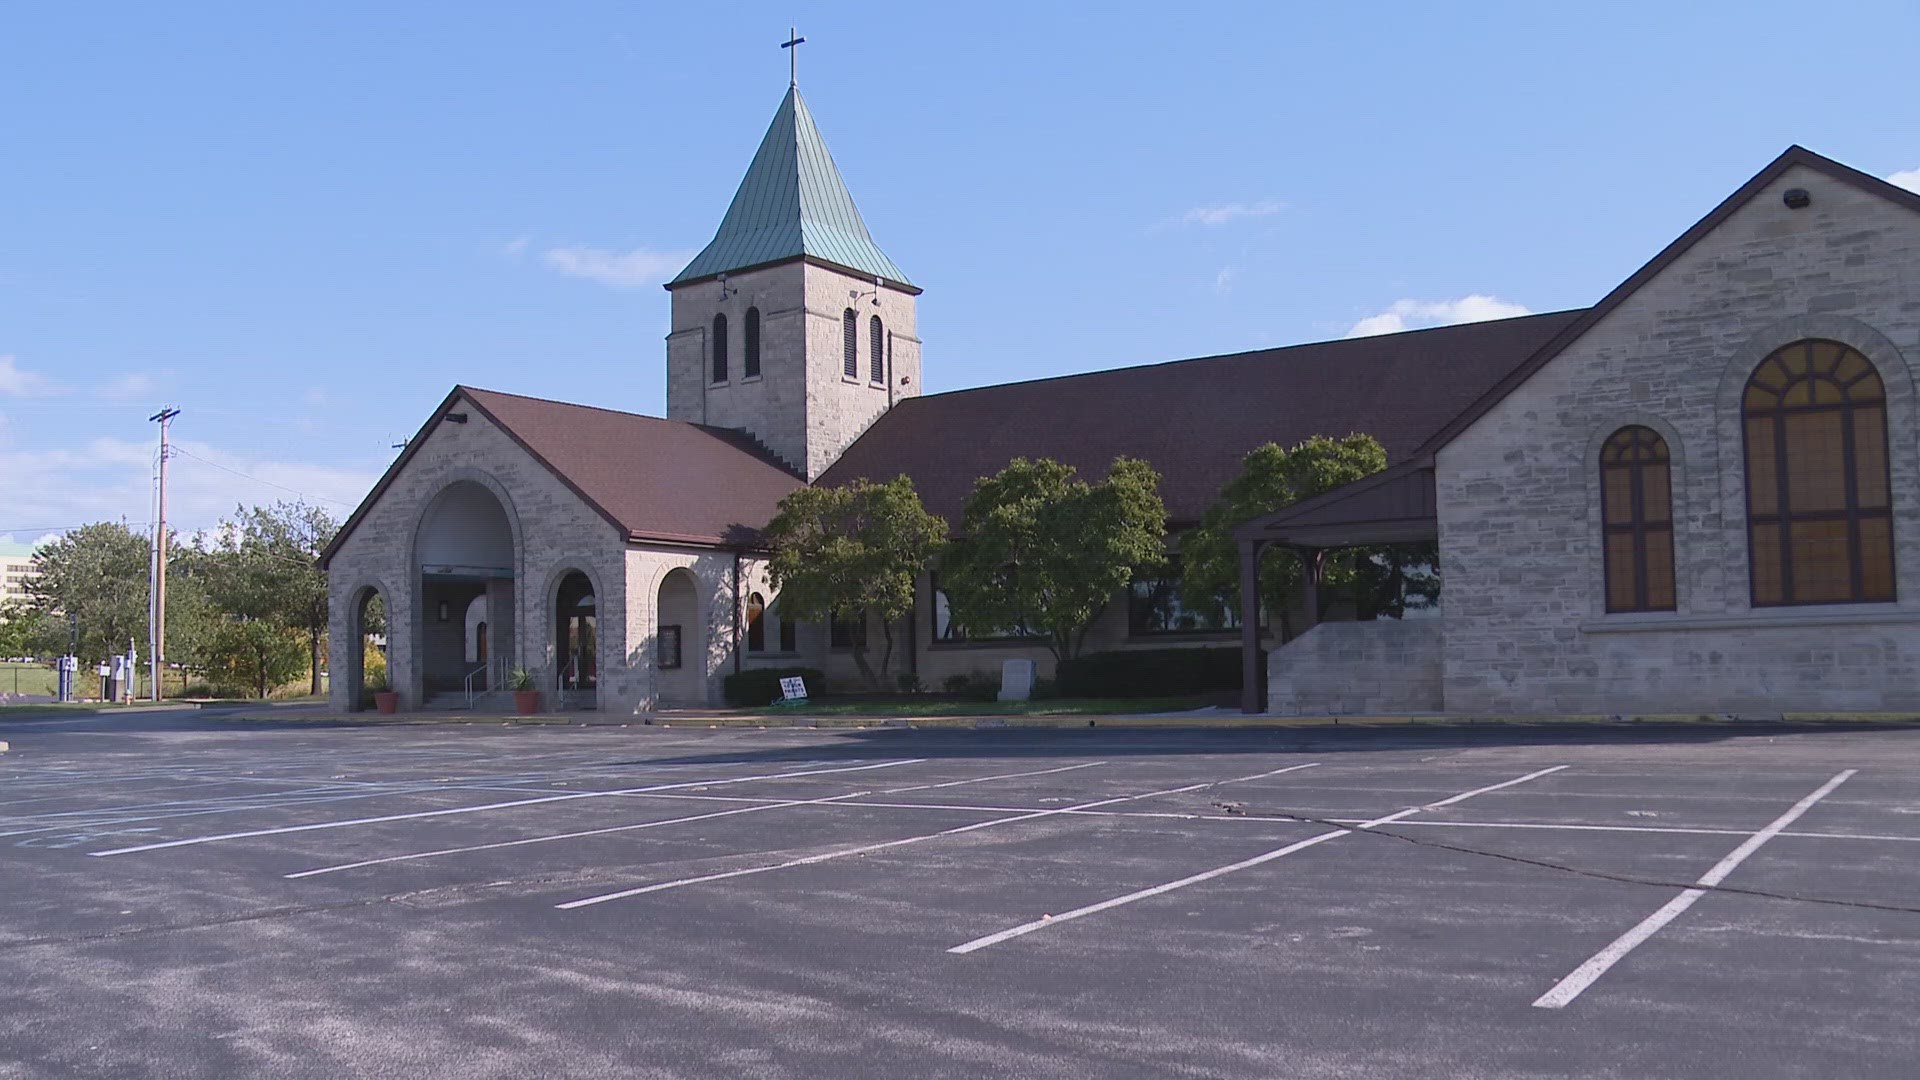 After more than 100 years, St. Monica Catholic Church will close its doors. The school has faced ongoing challenges due to inconsistent and declining enrollment.